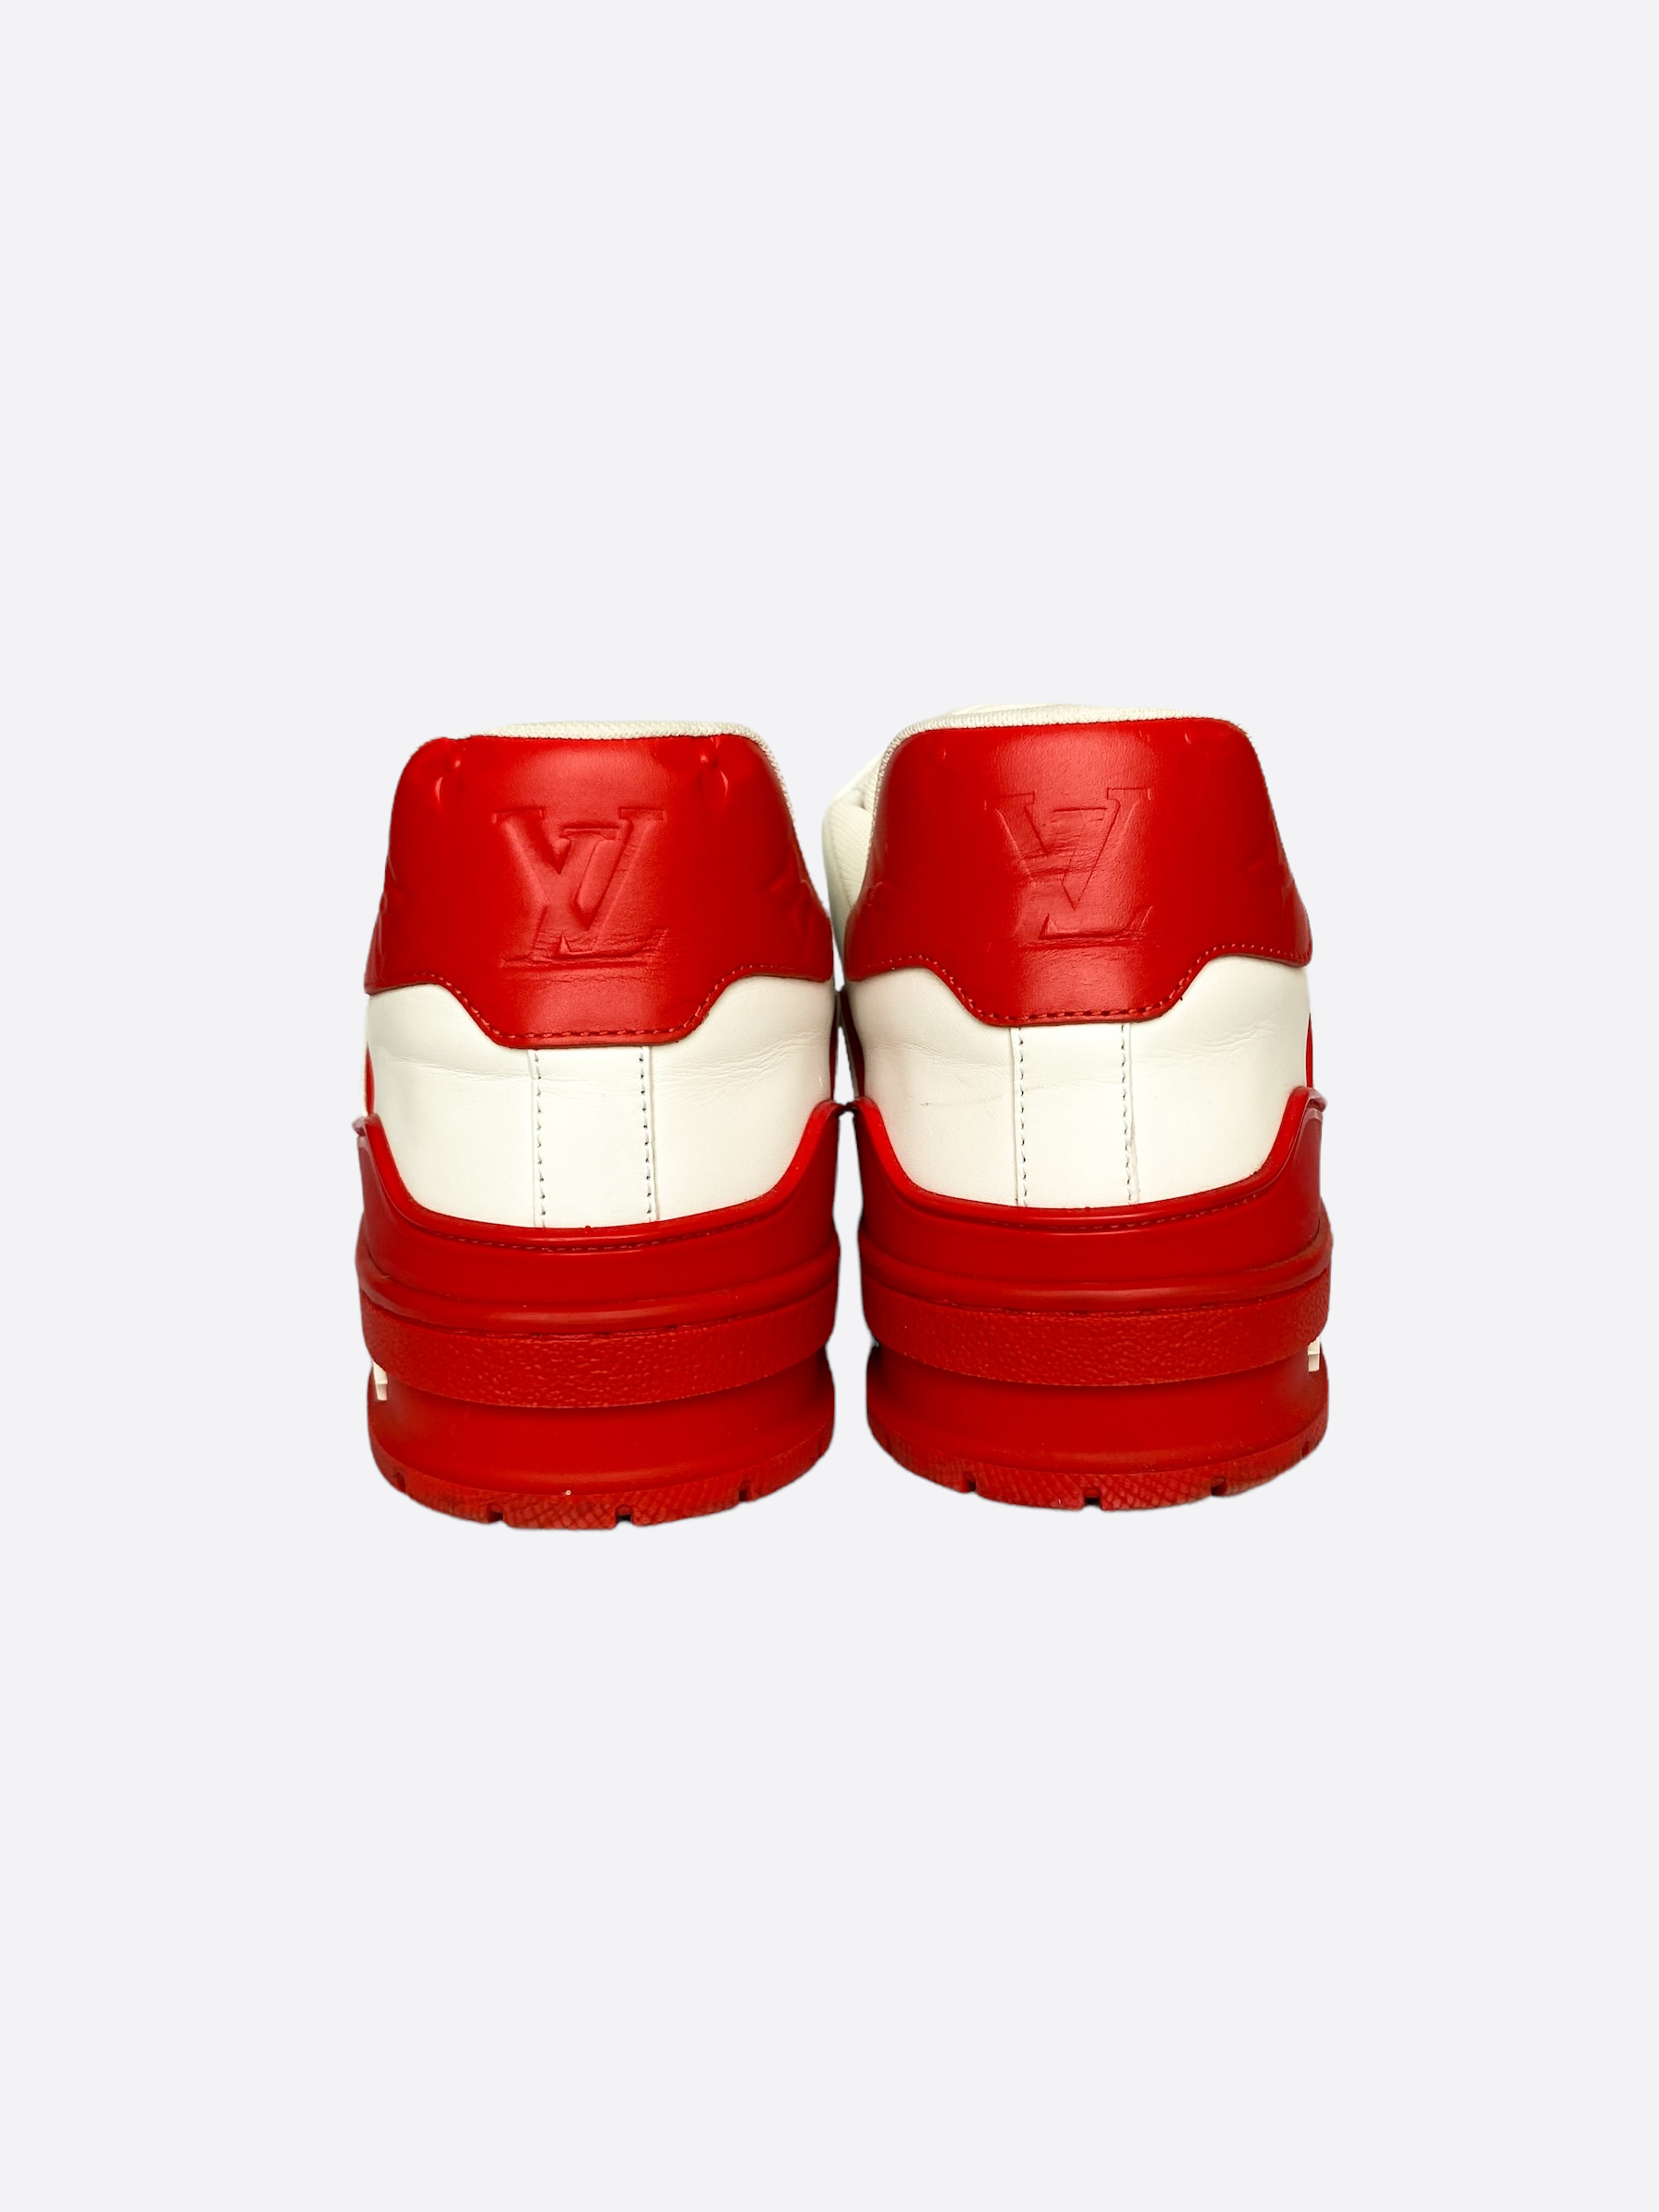 white and red louis vuitton shoes